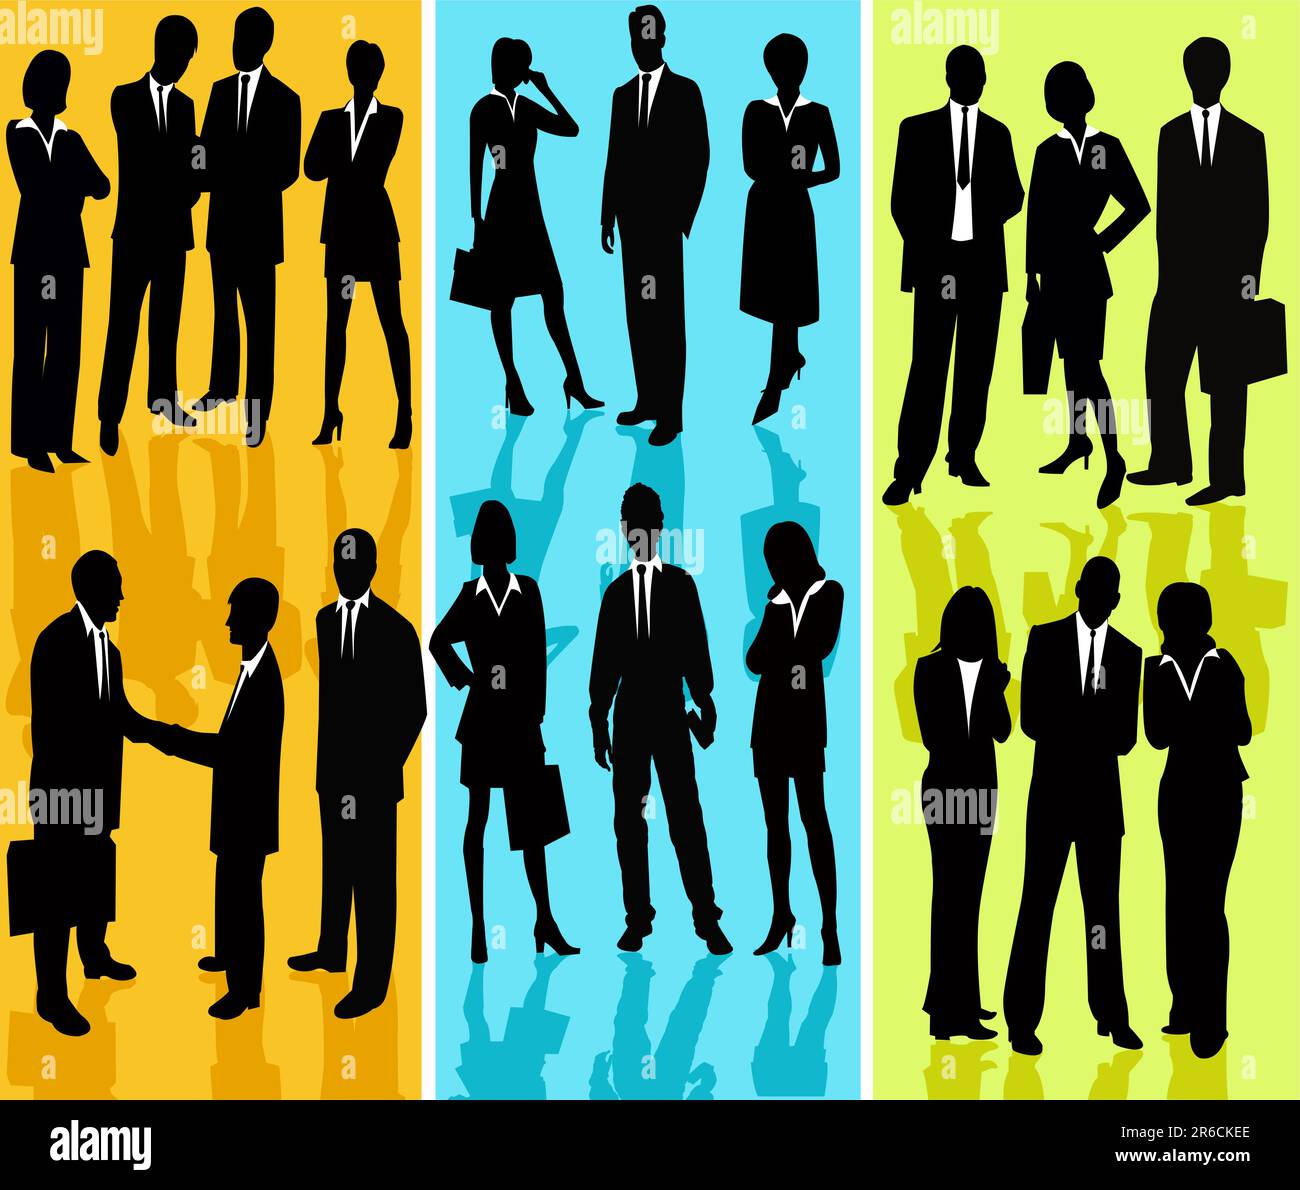 Business People - vector silhouette illustration Stock Vector